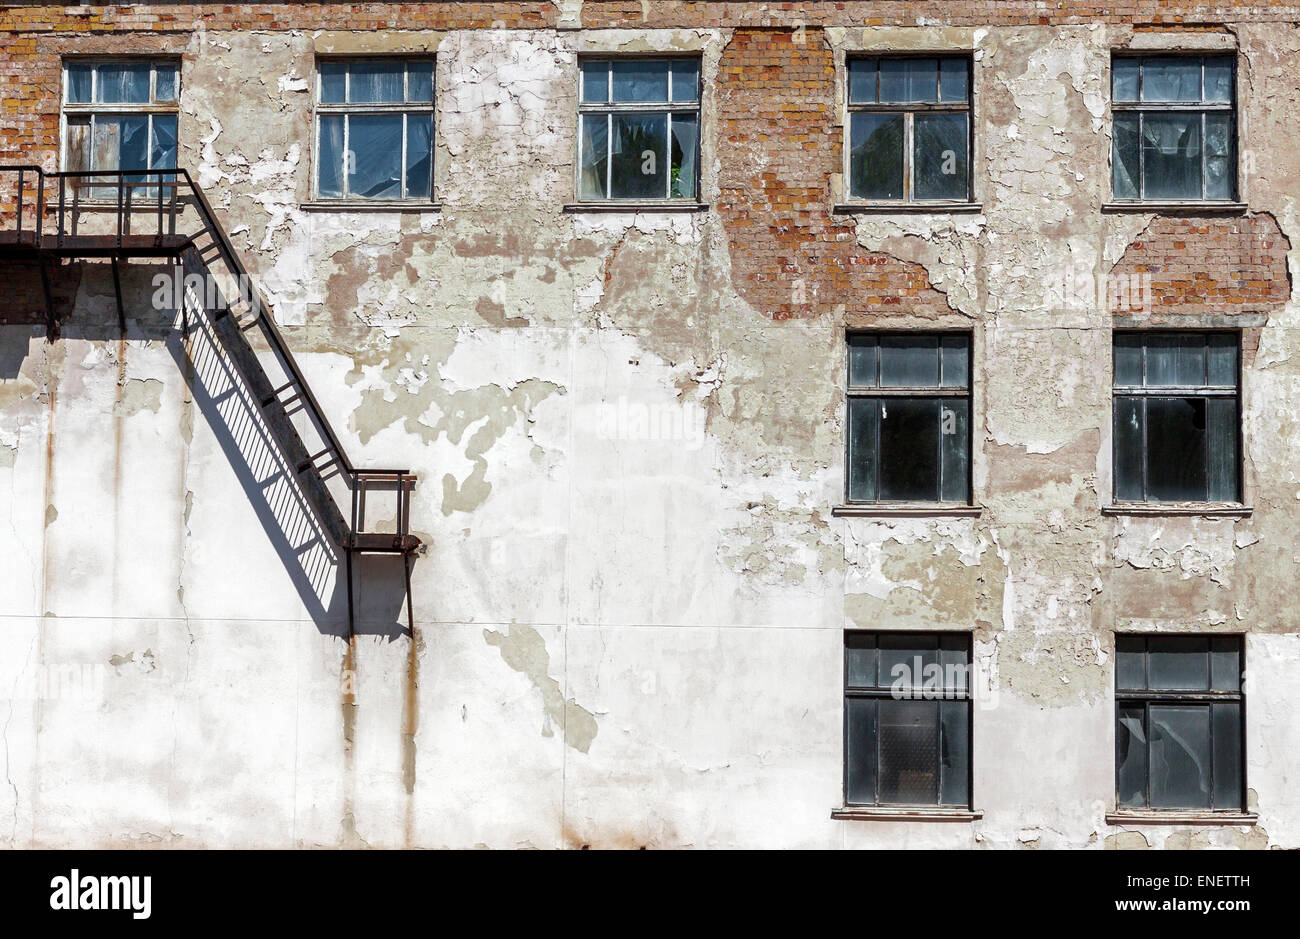 Grunge architecture details. Old abandoned factory with metal staircase and broken windows Stock Photo